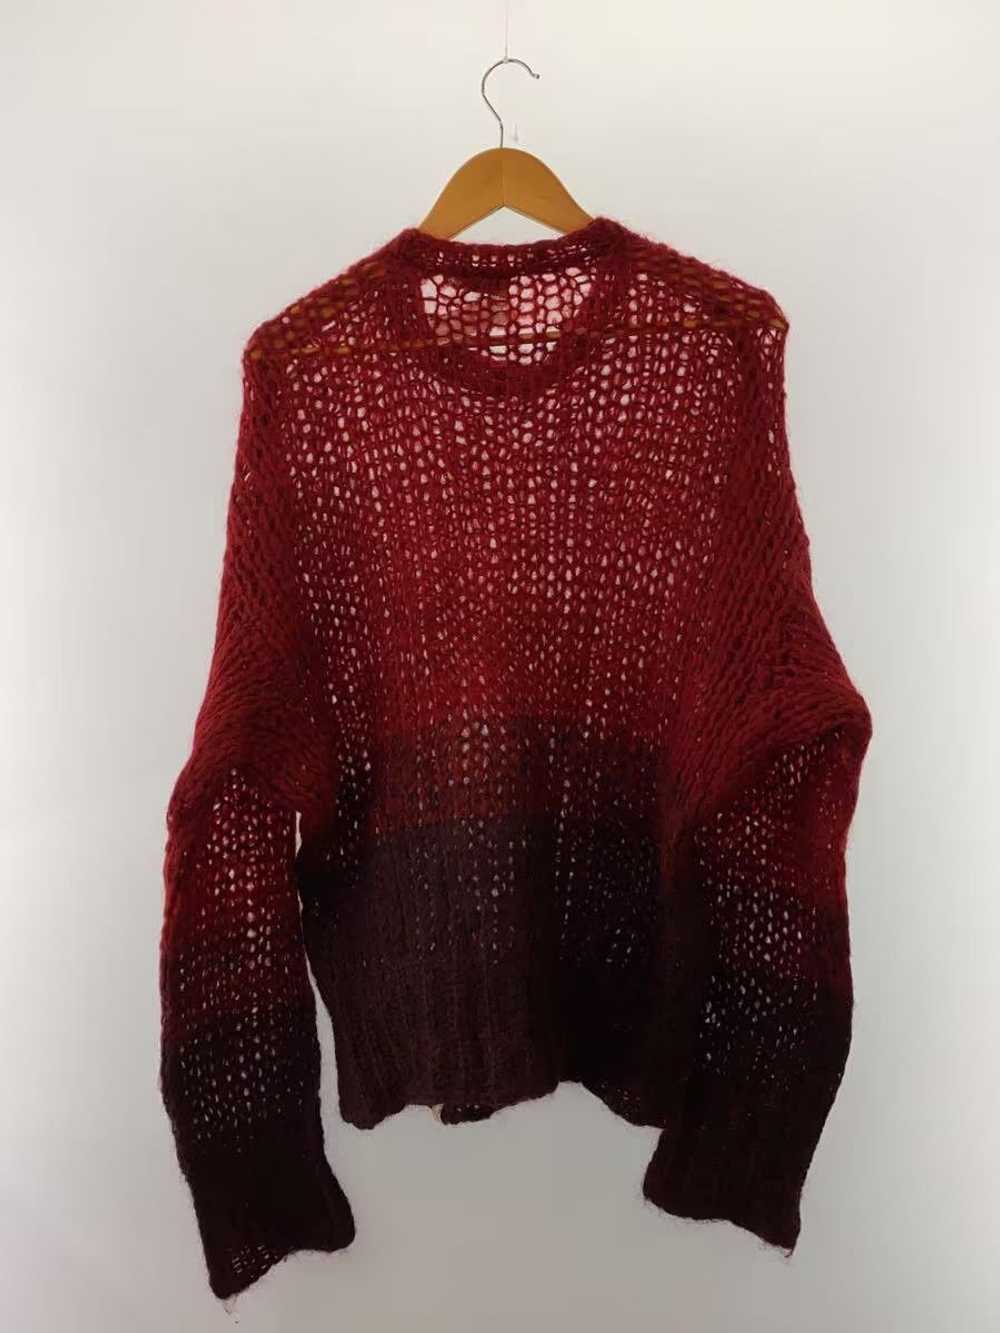 Vivienne Westwood Open Stitch Mohair Knit Sweater - image 2